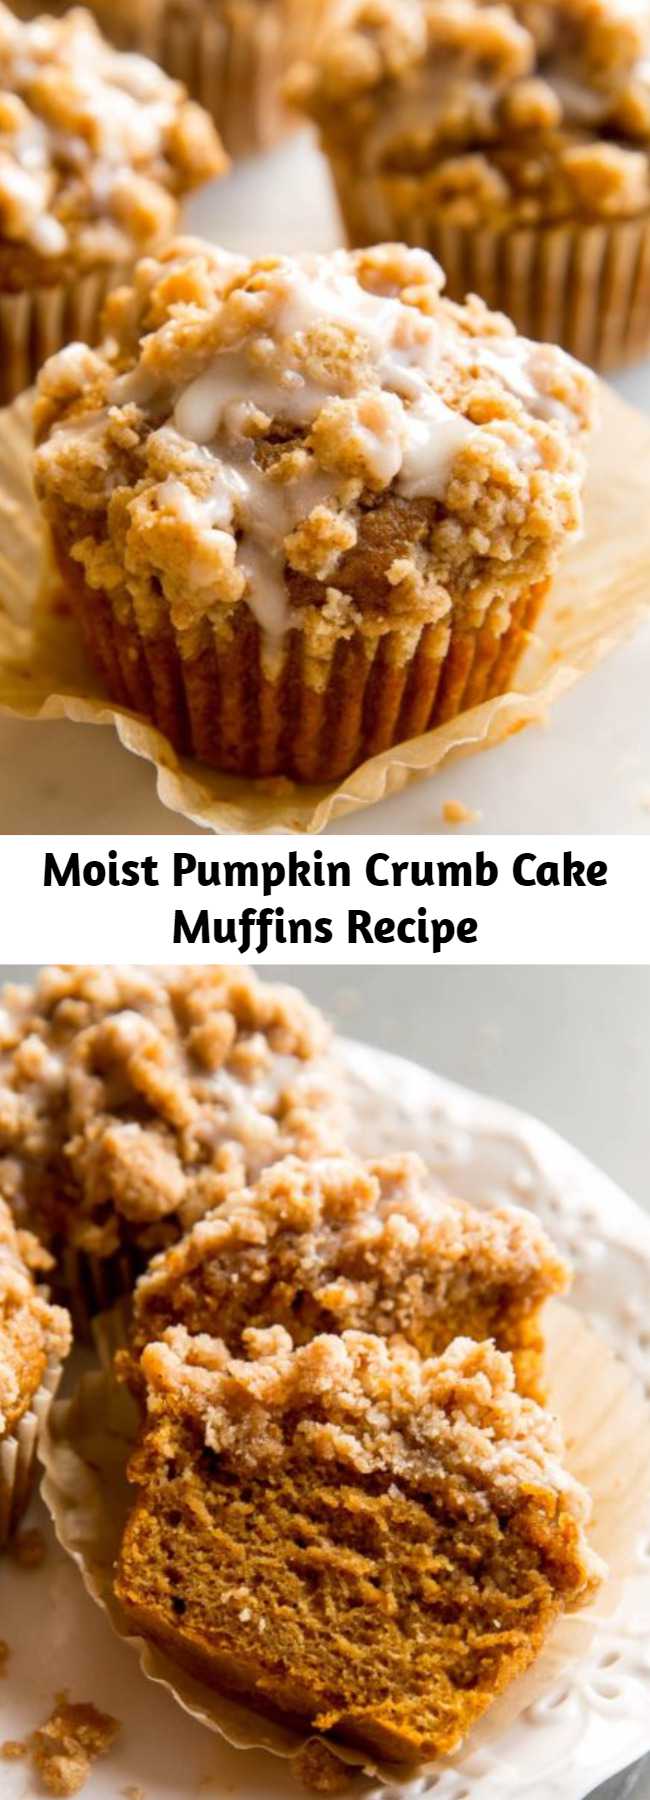 Moist Pumpkin Crumb Cake Muffins Recipe - These super soft pumpkin crumb cake muffins are topped with pumpkin spice crumbs and finished with sweet maple icing. They’re a reader favorite and after baking one batch, you’ll understand why!